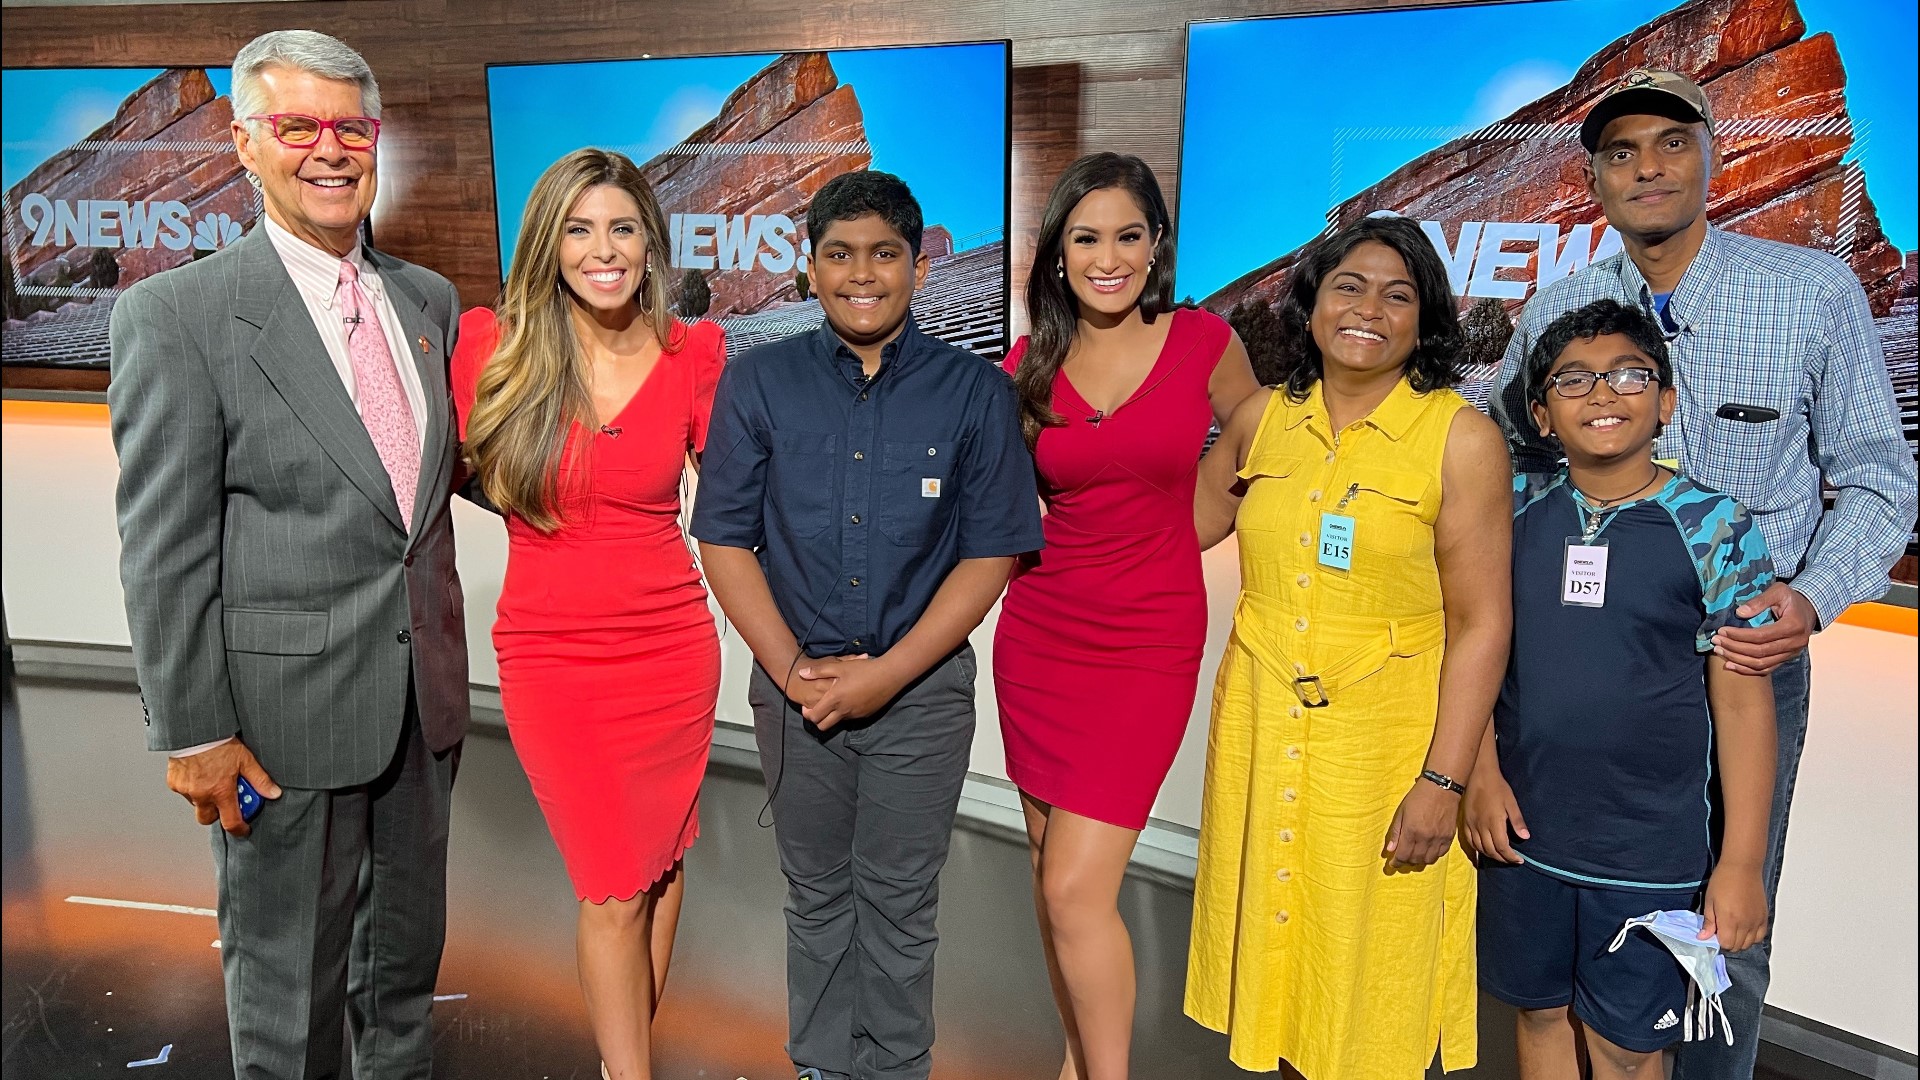 Vikram Raju, 12, from Aurora finished second in the 2022 Scripps National Spelling Bee after participating in the first spell-off in its history.